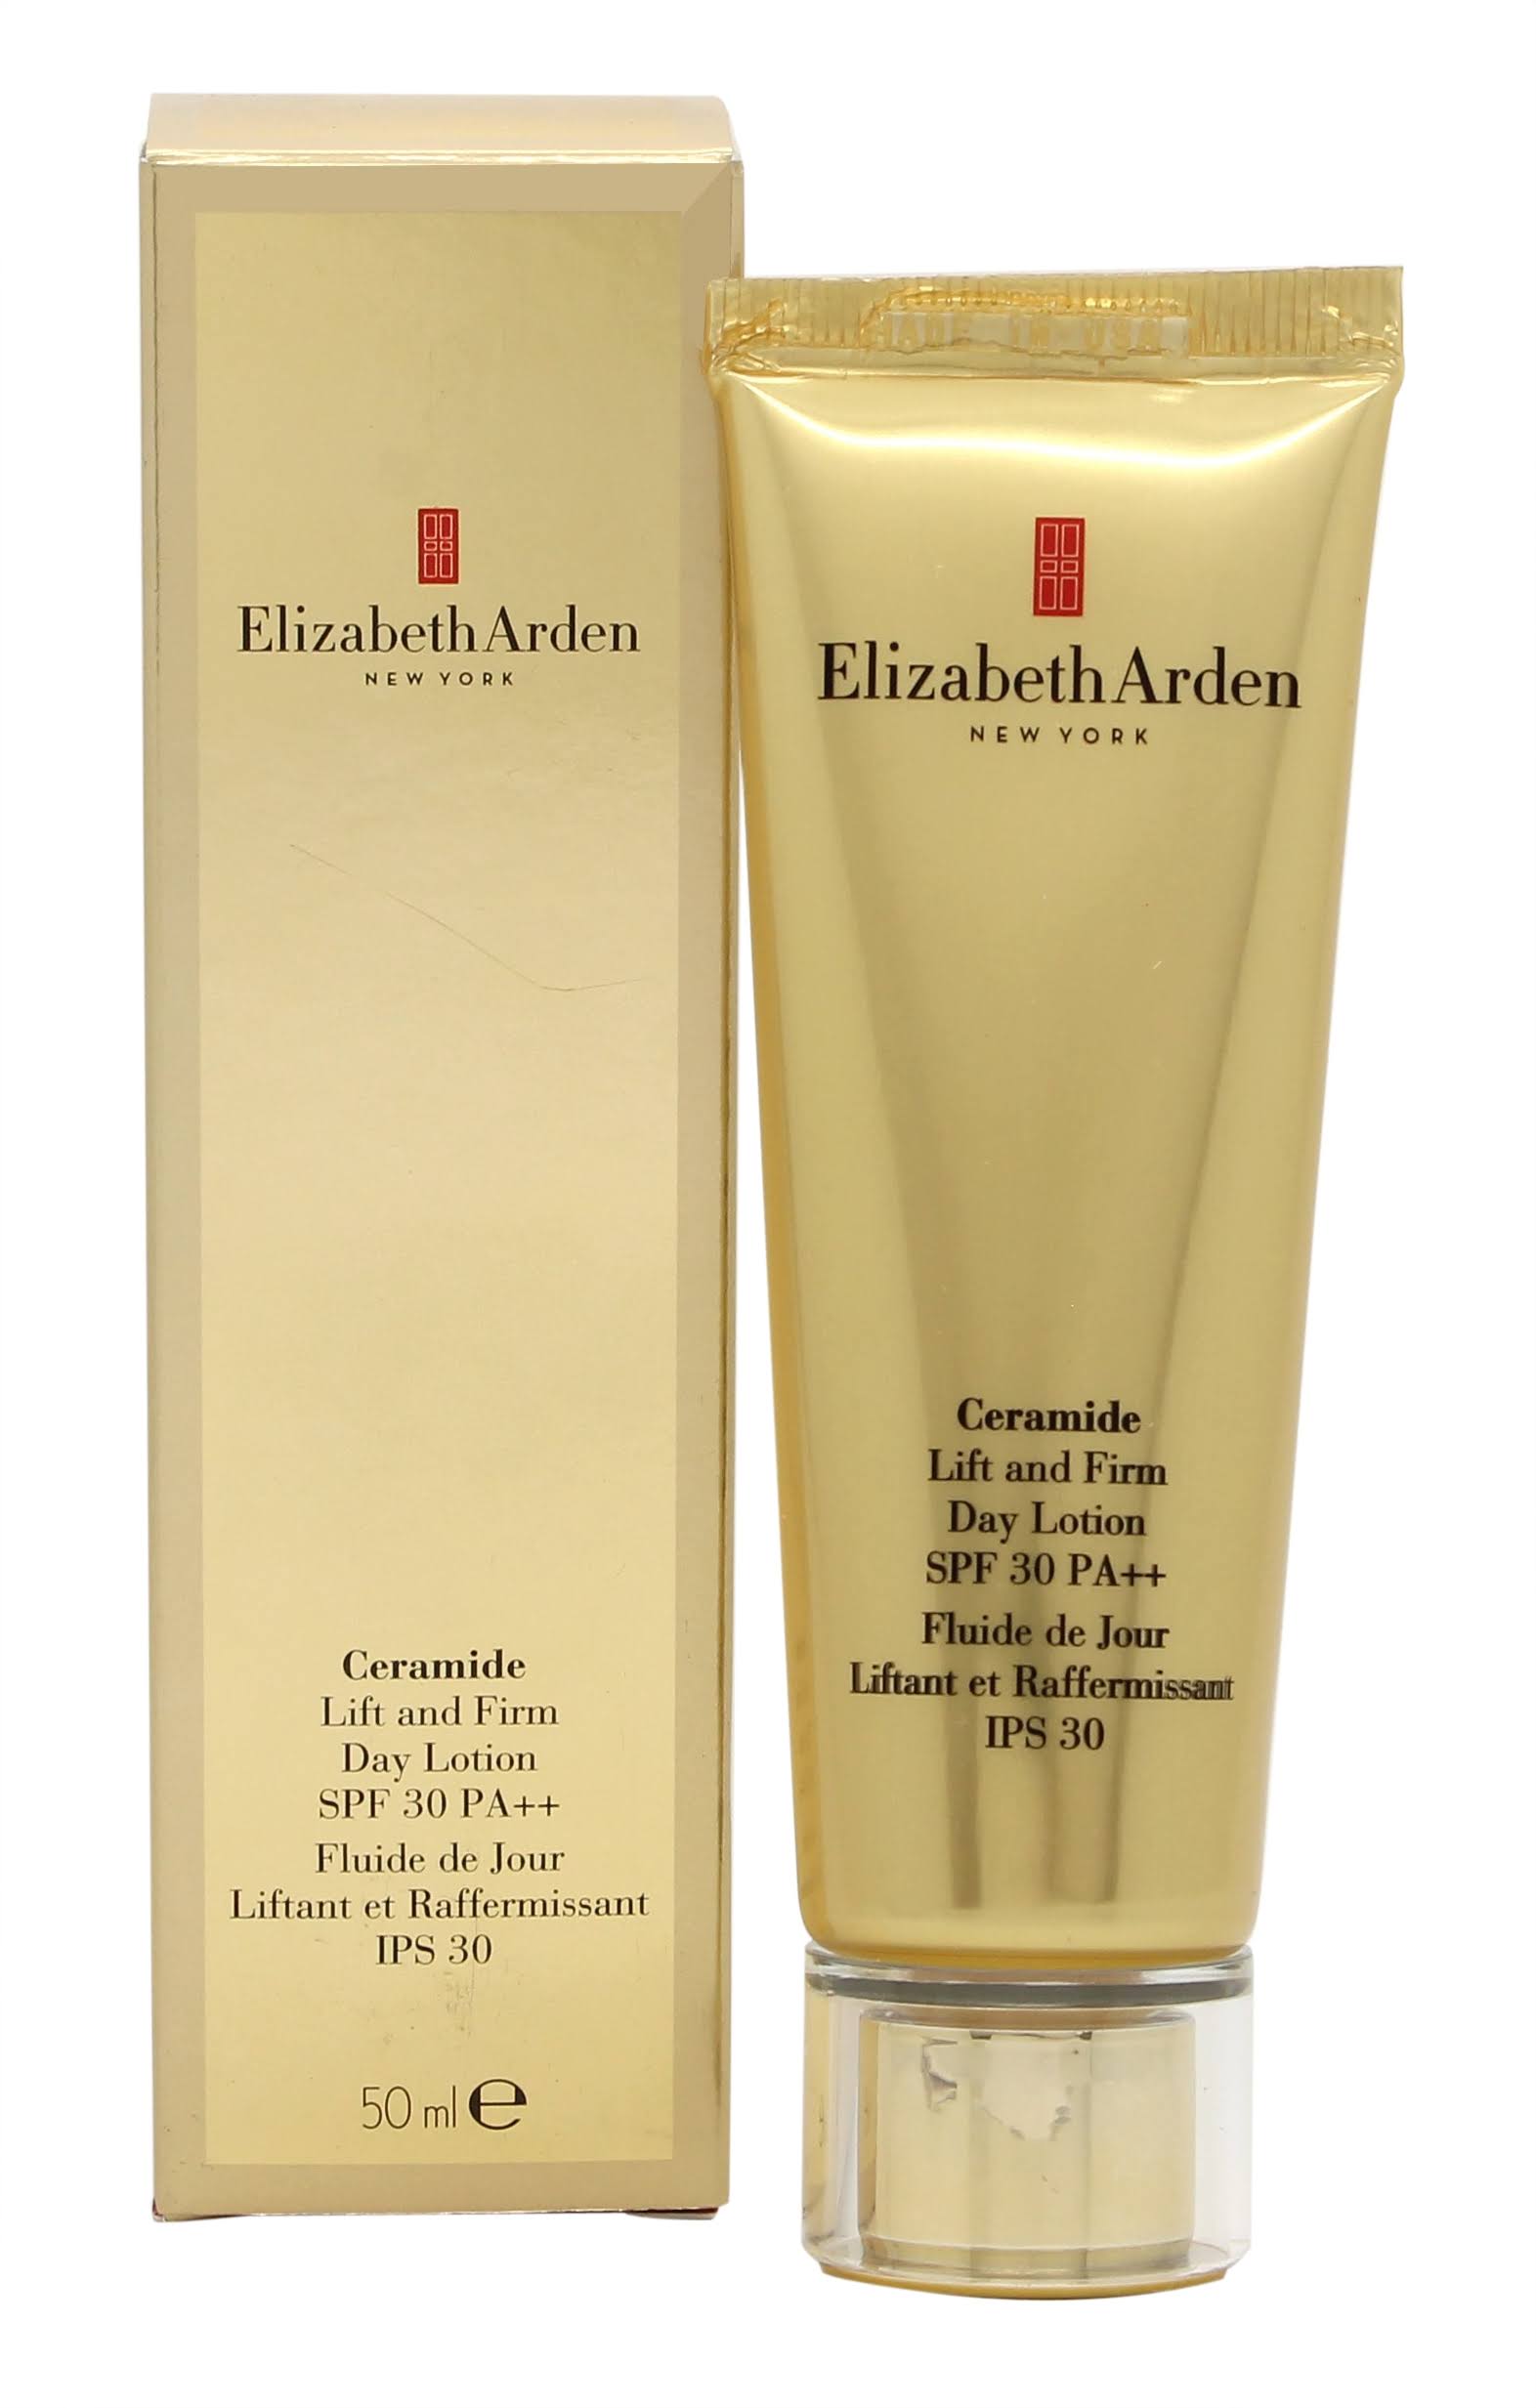 Elizabeth Arden Ceramide Lift and Firm Day Lotion 50ml